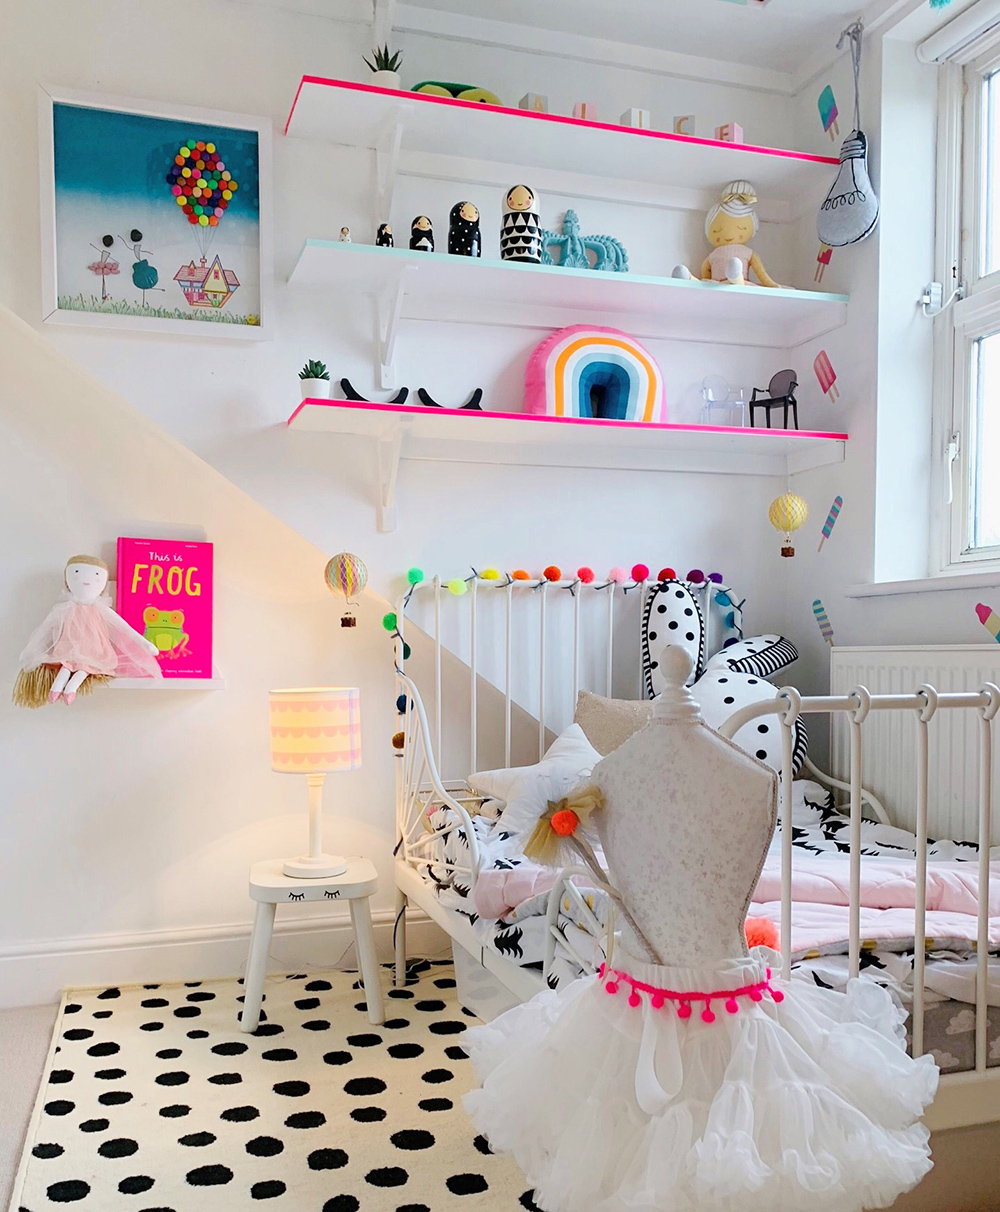 Little girls bedroom decor. Black and white decor with neon pink accents 